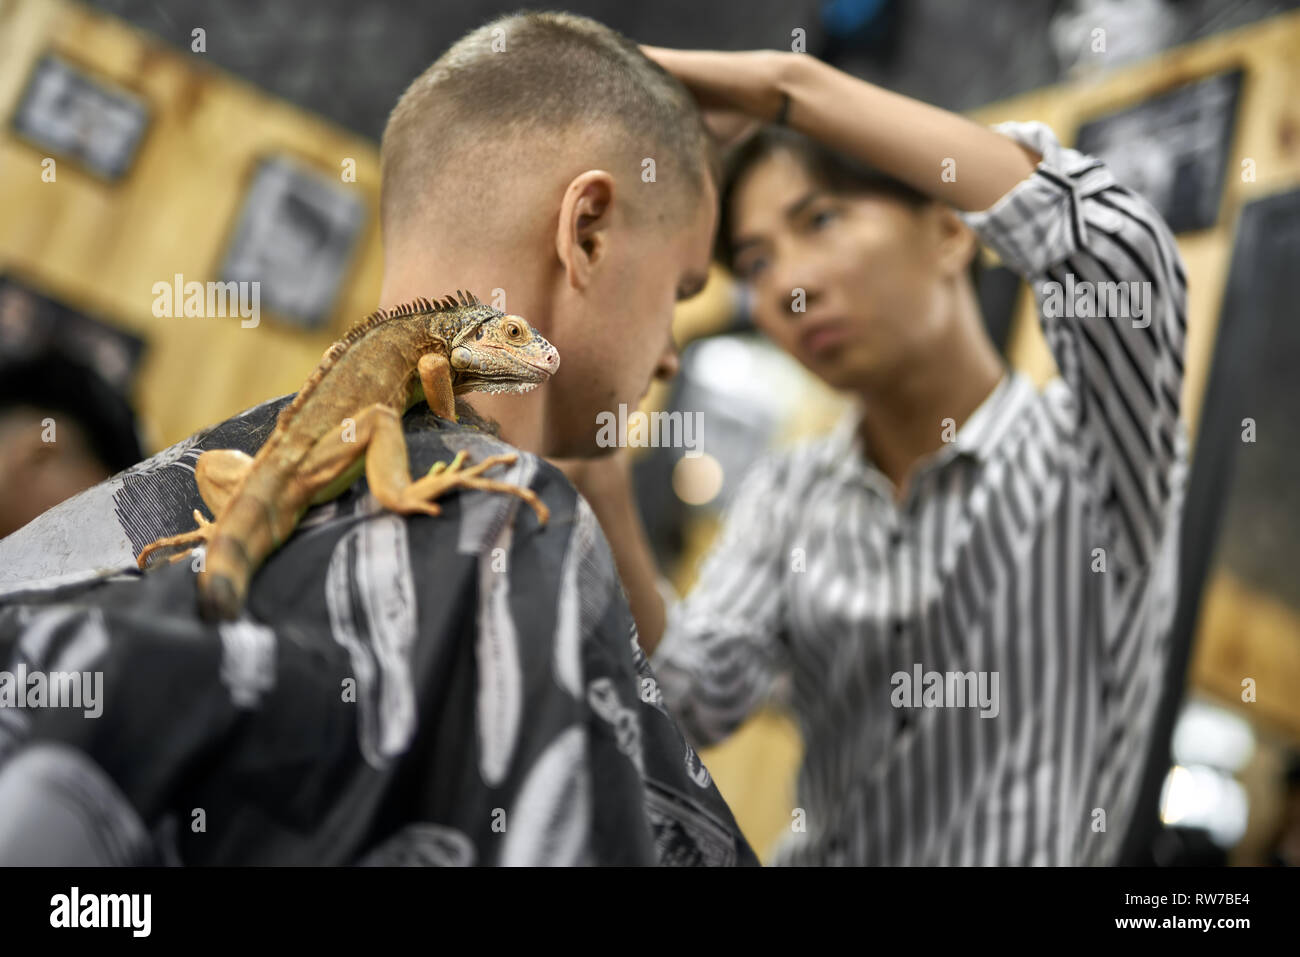 Stylish white guy in a black salon cape with an iguana on his shoulder in the barbershop. Asian barber in a white-black shirt is cutting his hair. Clo Stock Photo